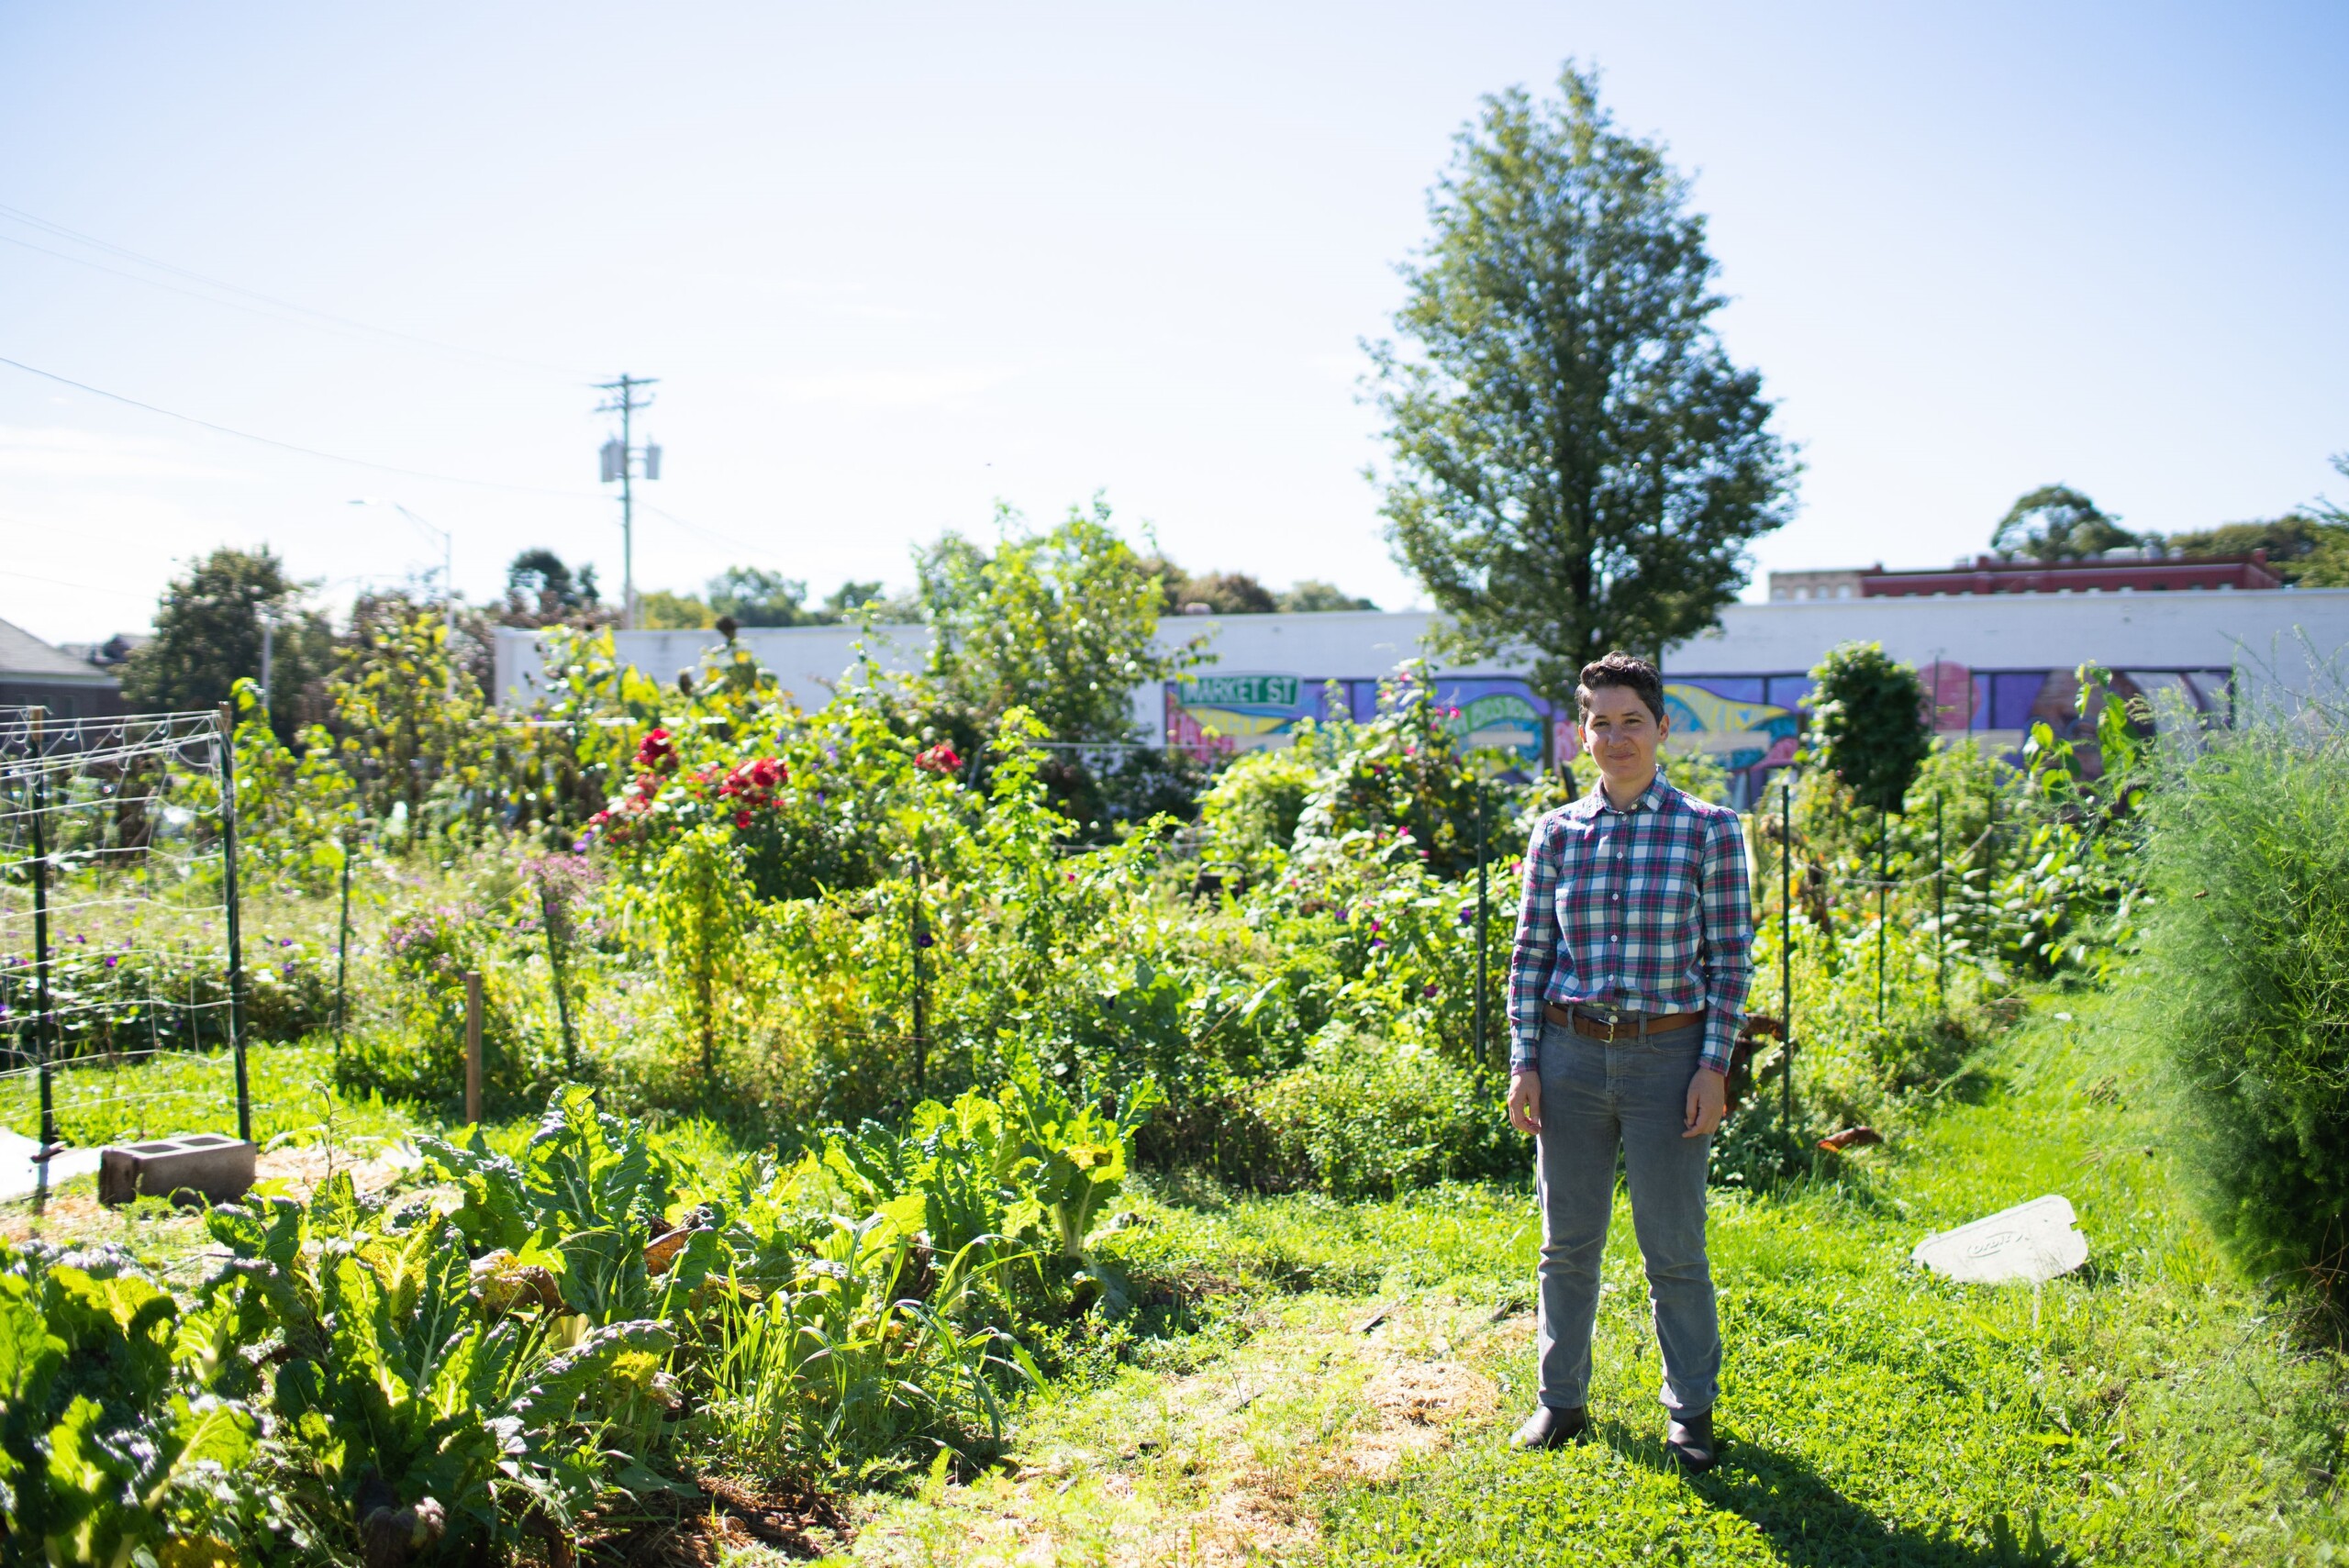 Glynwood Center for Regional Food and Farming Food Sovereignty Fund Project